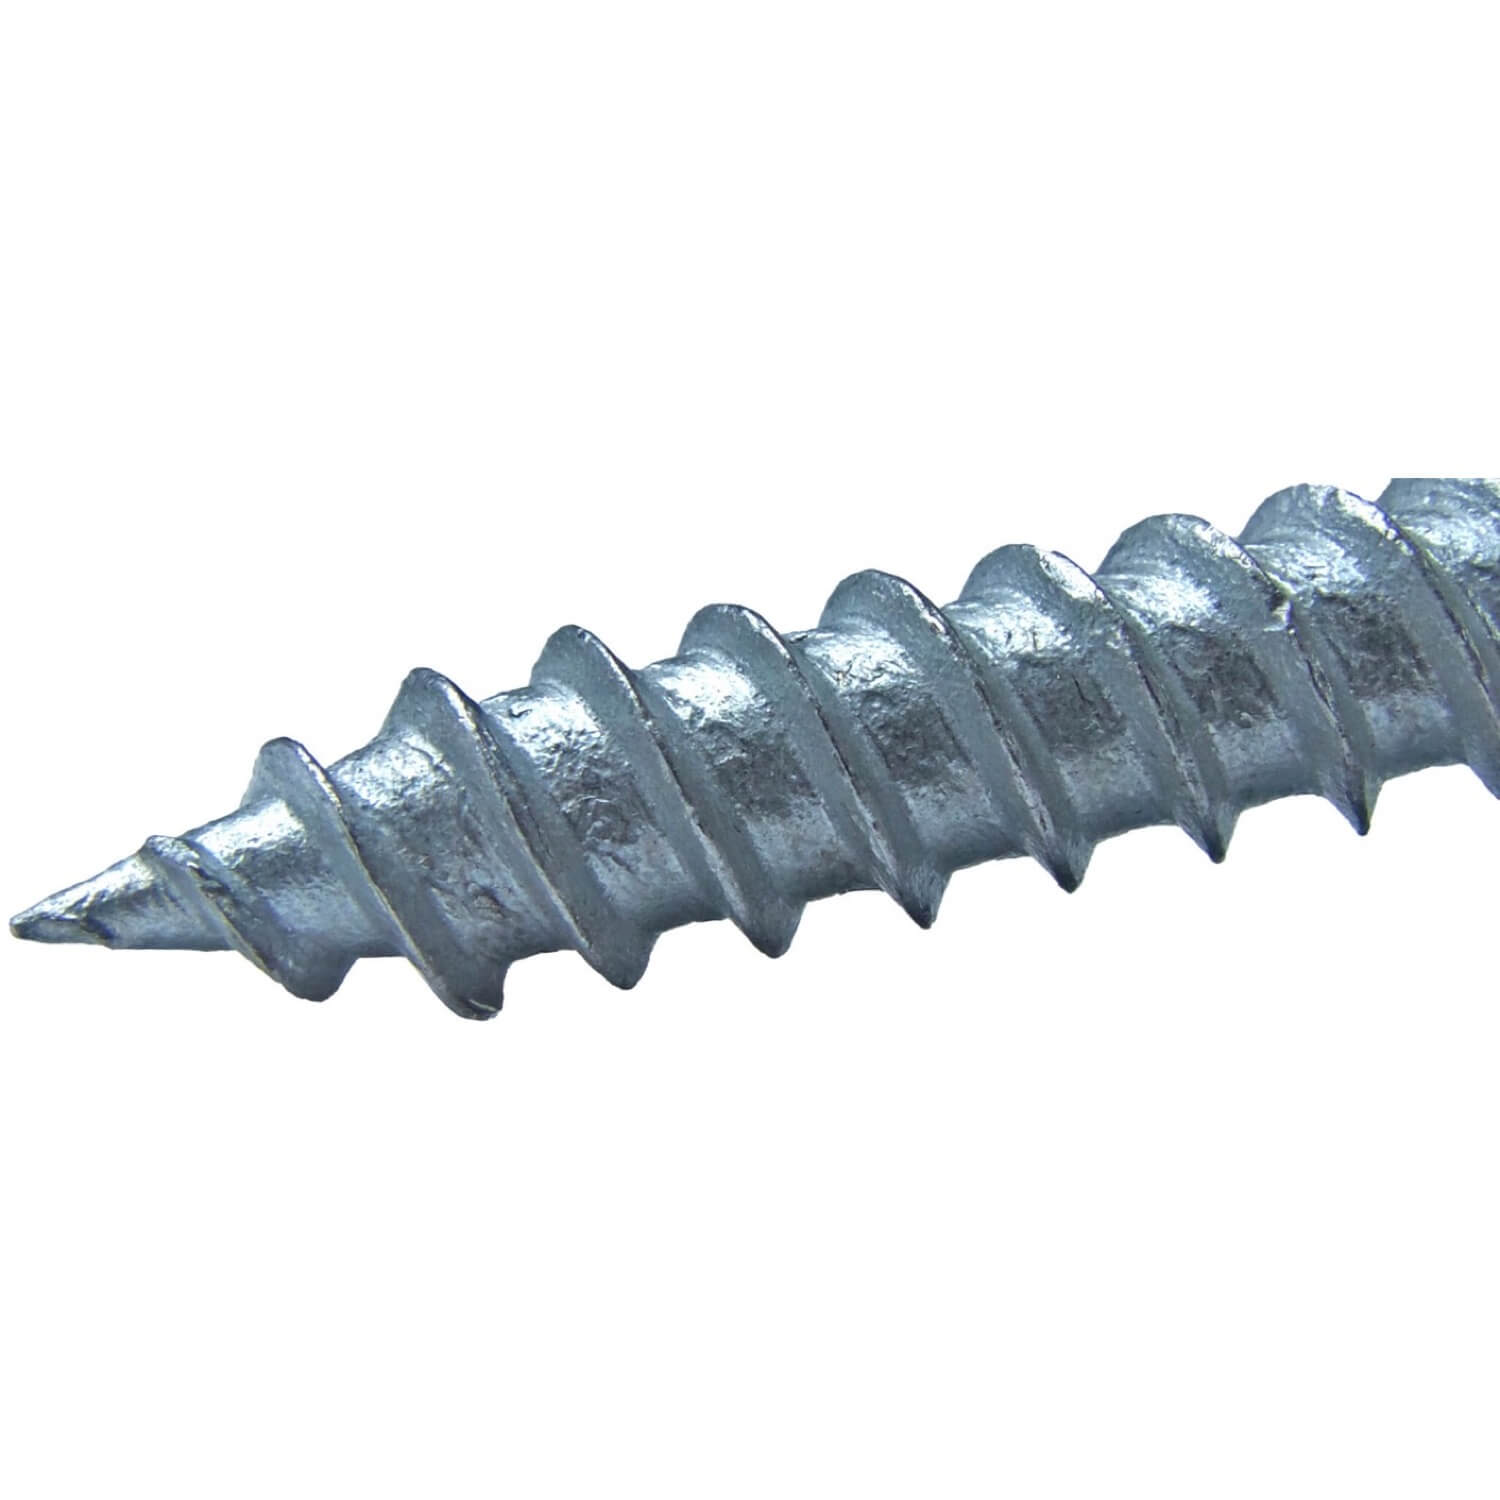 50mm CORRUGATED ROOFING SCREWS & BLACK STRAP CAPS FOR SHEET ROOFING 2" 25 